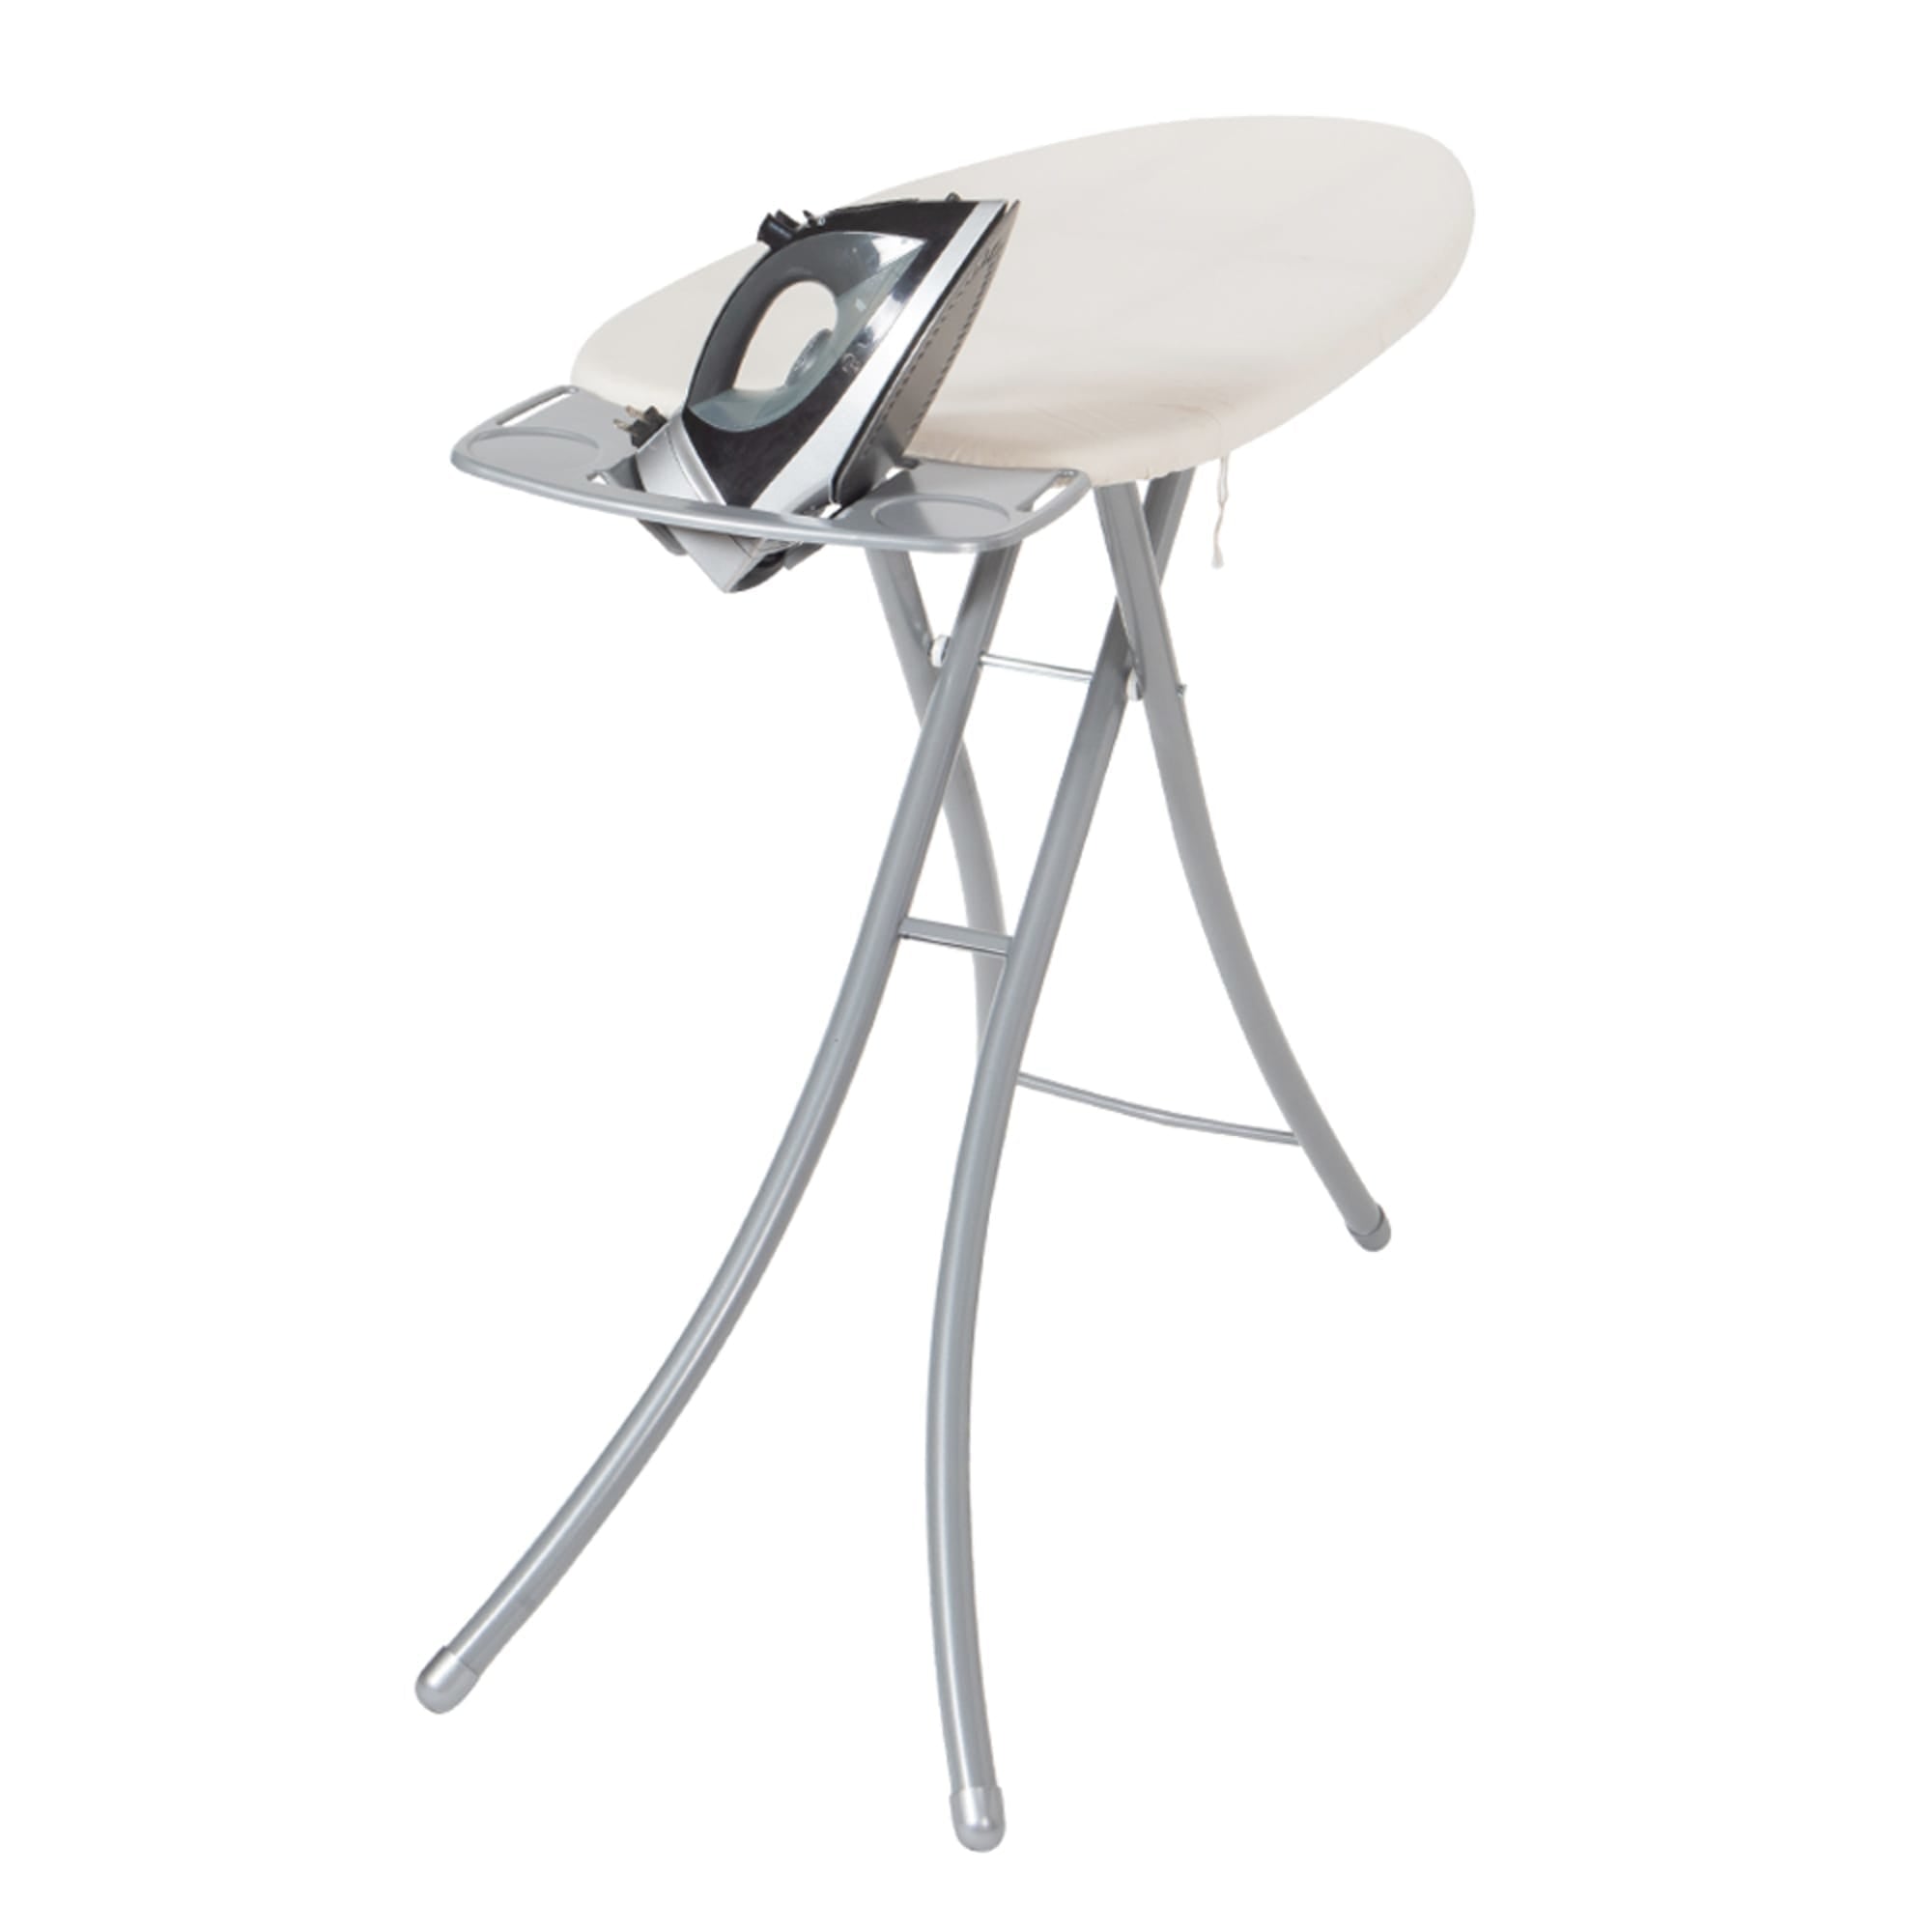 Seymour Home Products Adjustable Height, Wide Top Ironing Board with Iron Rest, Khaki $60 EACH, CASE PACK OF 1